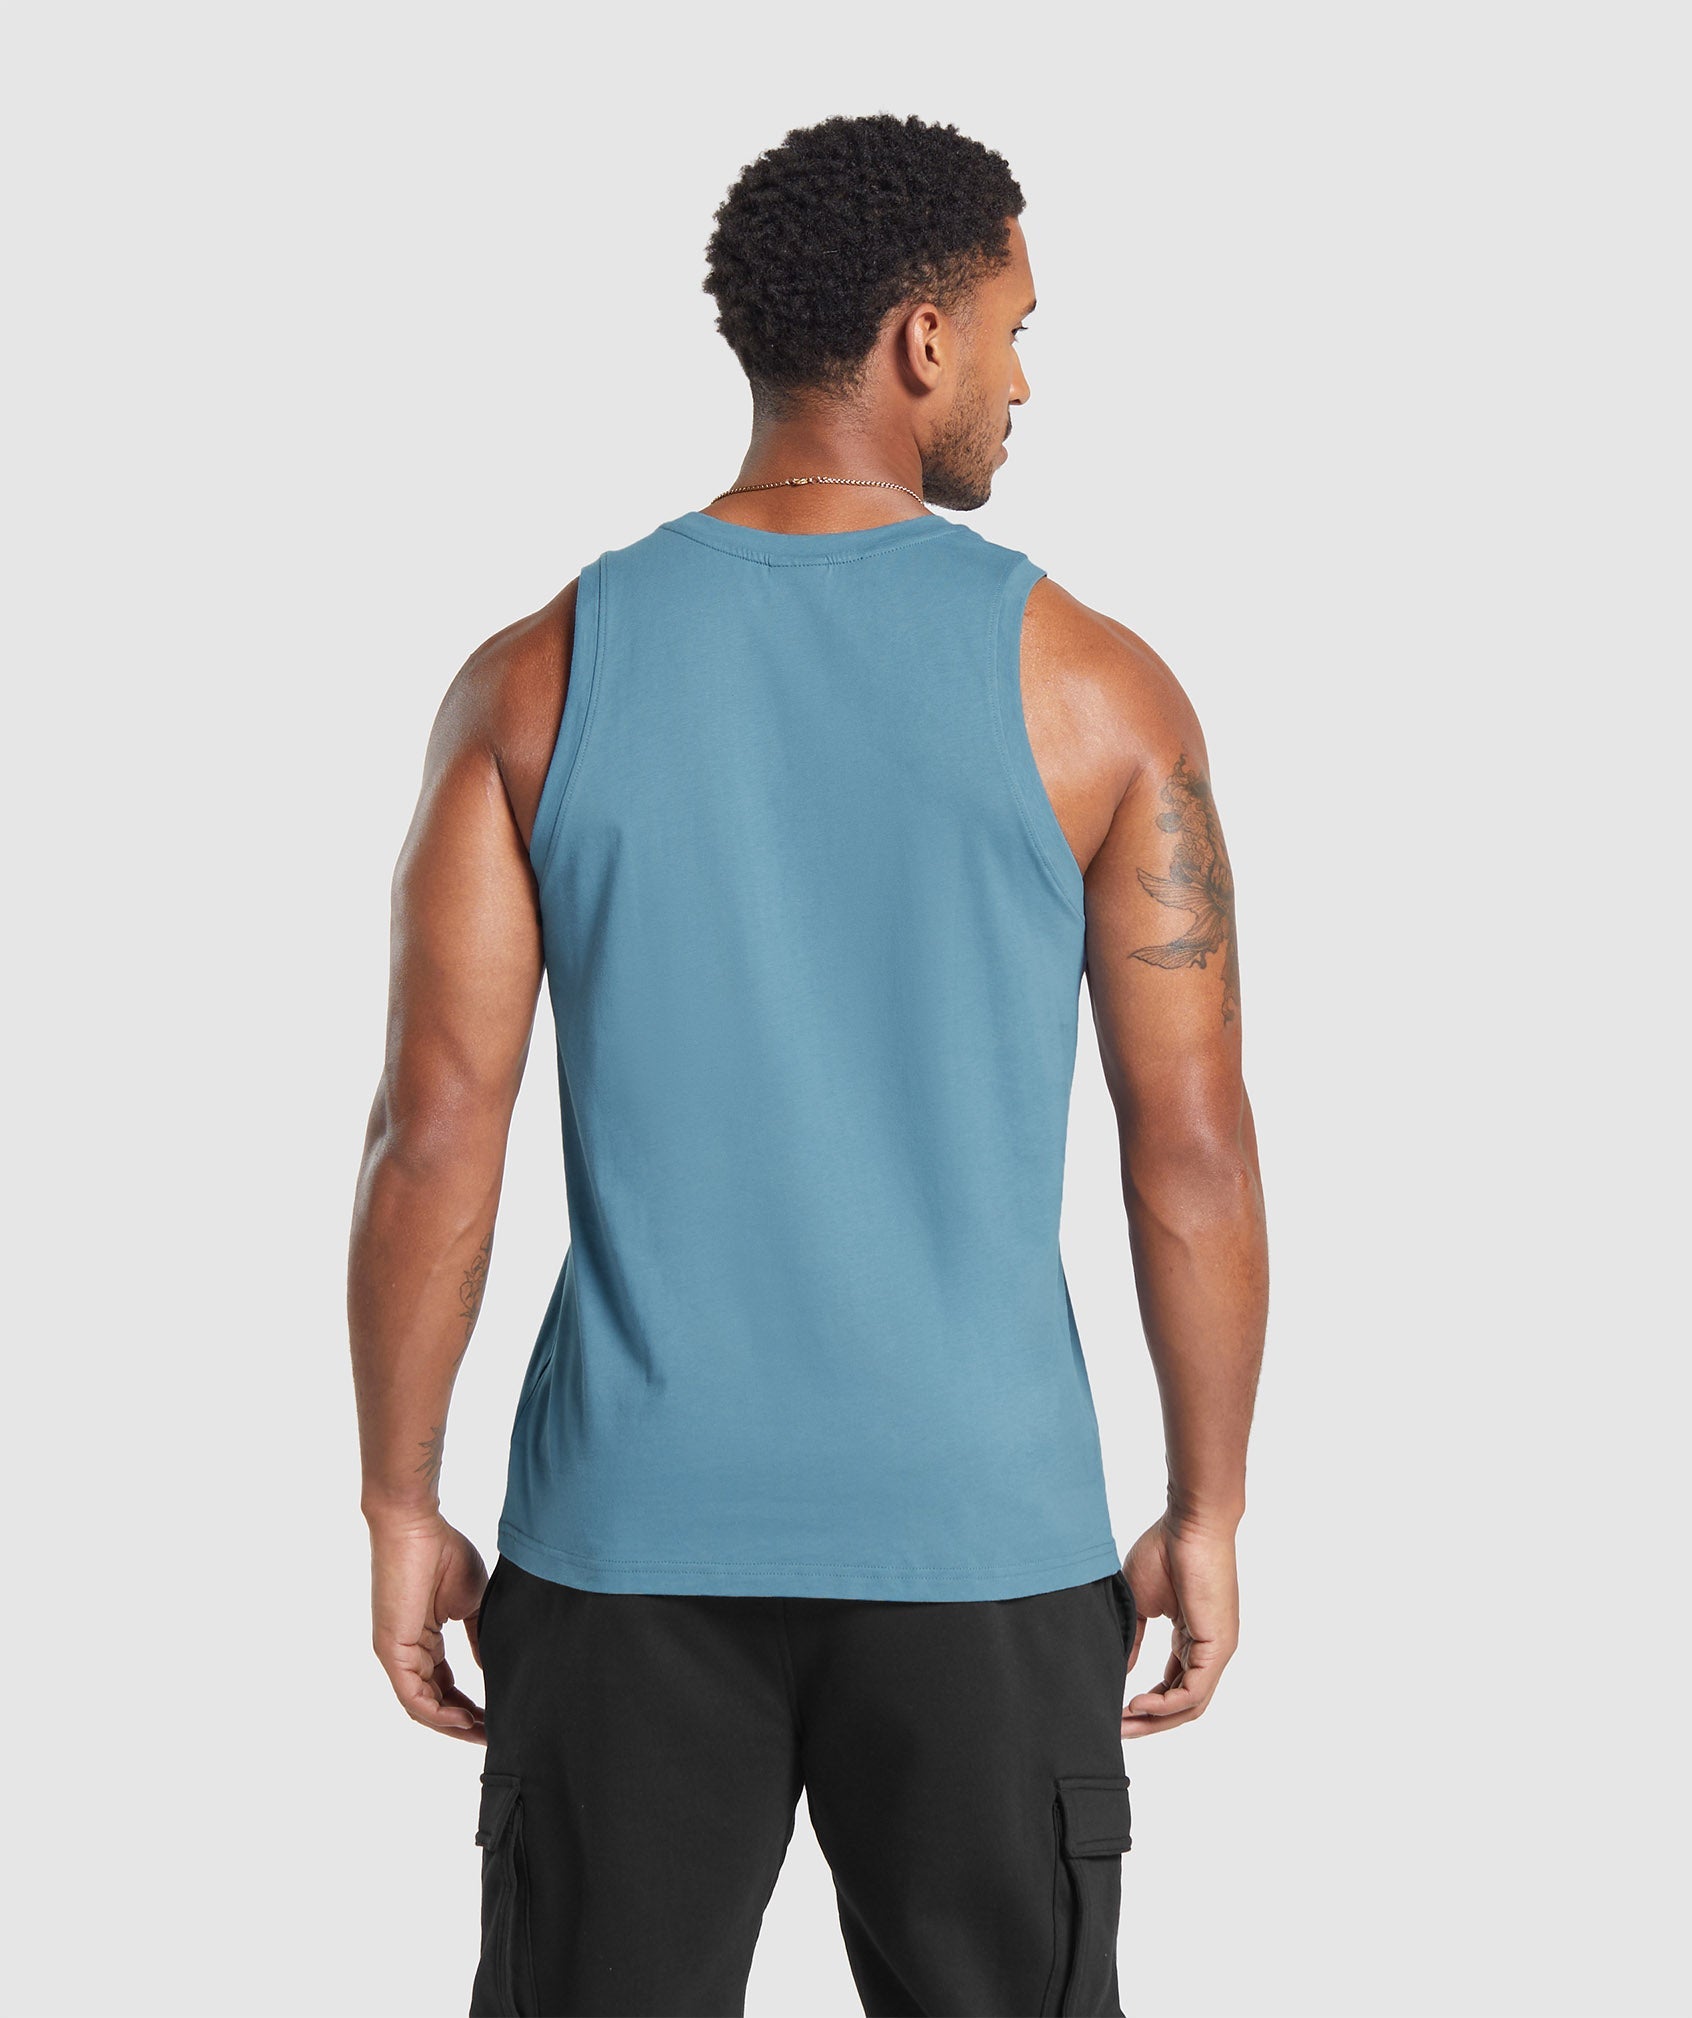 Gymshark ribbed tank looks insane. Pump aint that bad either in this